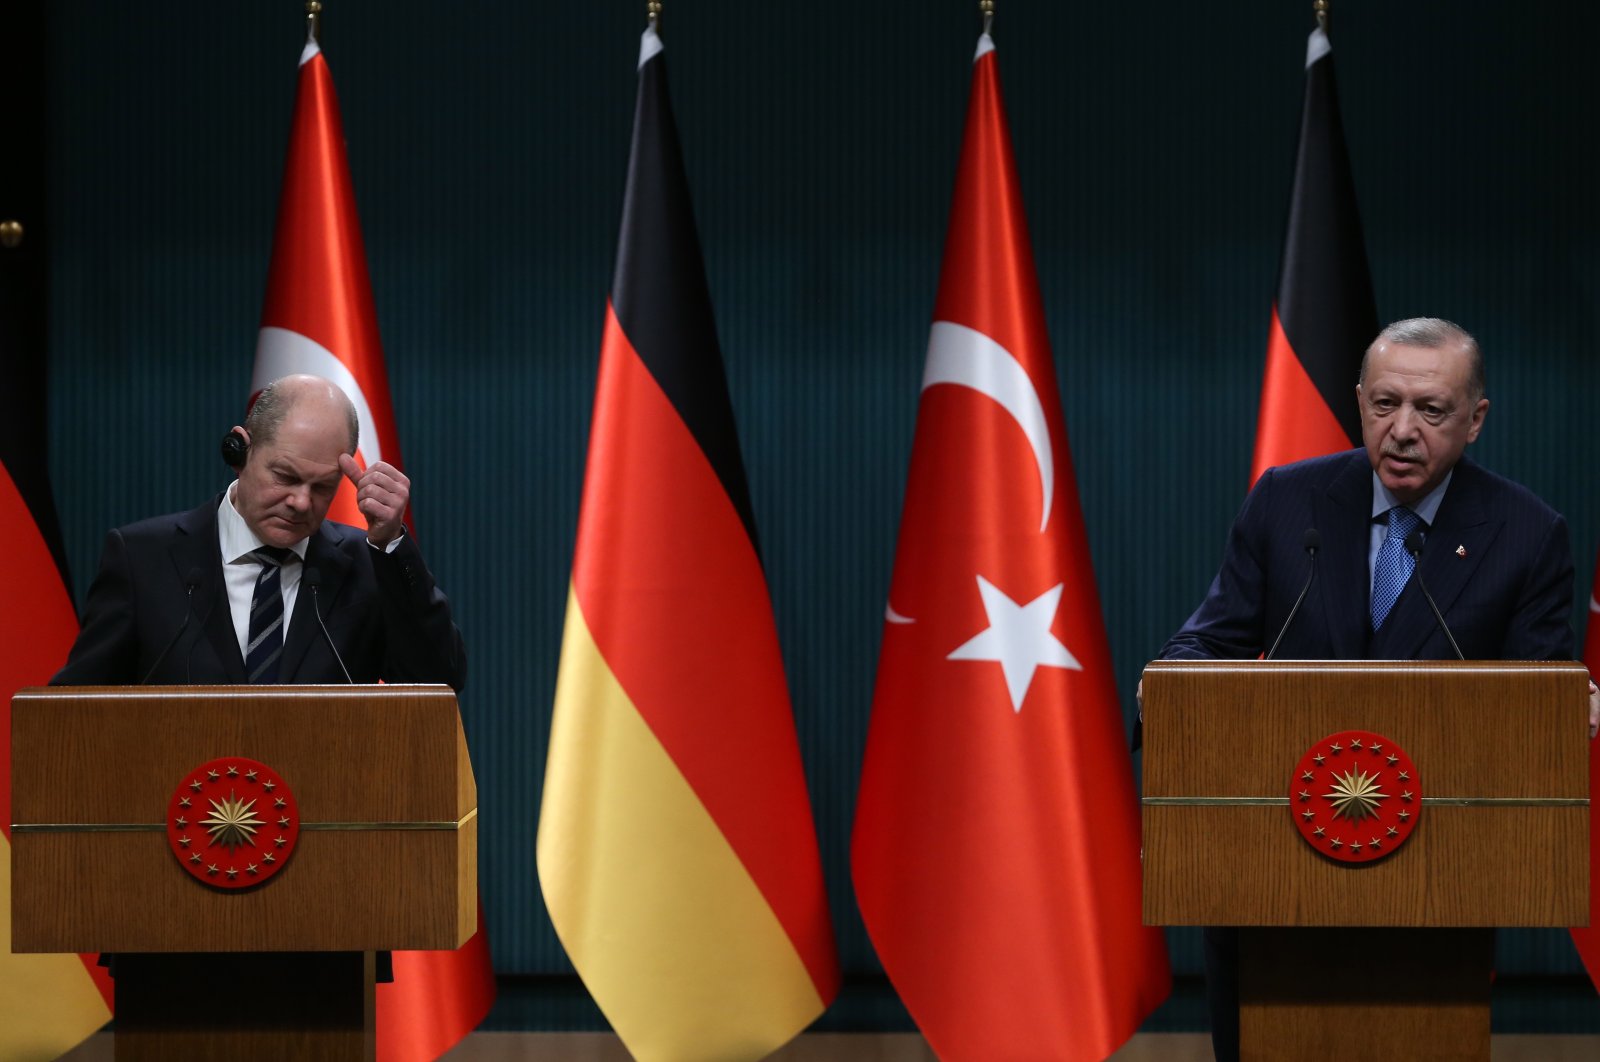 President Recep Tayyip Erdoğan (R) and German Chancellor Olaf Scholz (L) attend a press conference after their meeting at the Presidential Palace in Ankara, Turkey, 14 March 2022.  EPA/STR